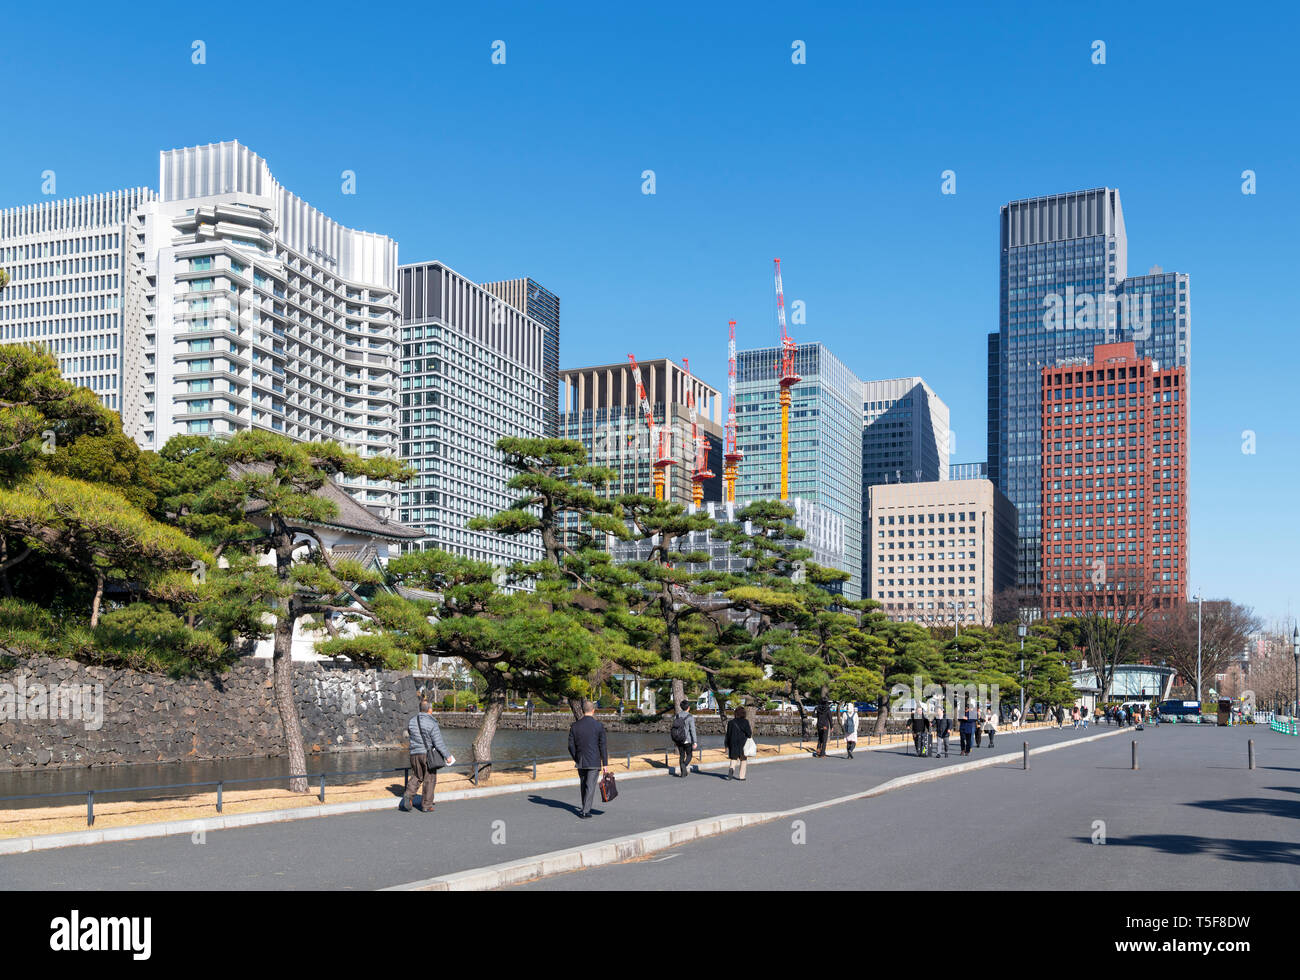 Tokyo, Marunouchi. Skyscrapers in the Marunouchi district with the moat and walls of the Imperial Palace in the foreground, Tokyo, Japan Stock Photo